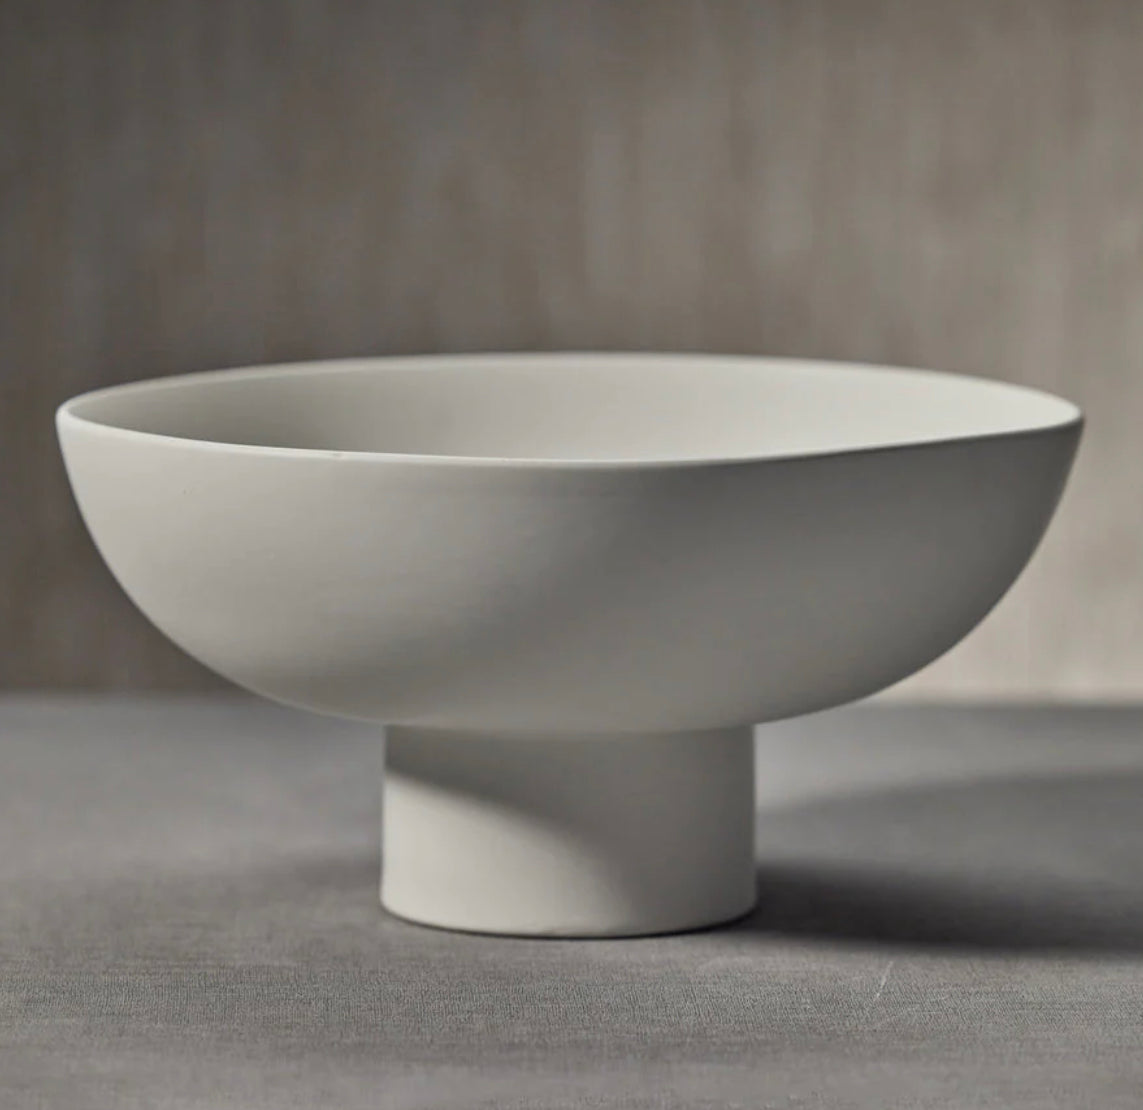 Zodax | Côte d'Ivoire White Ceramic Footed Bowl